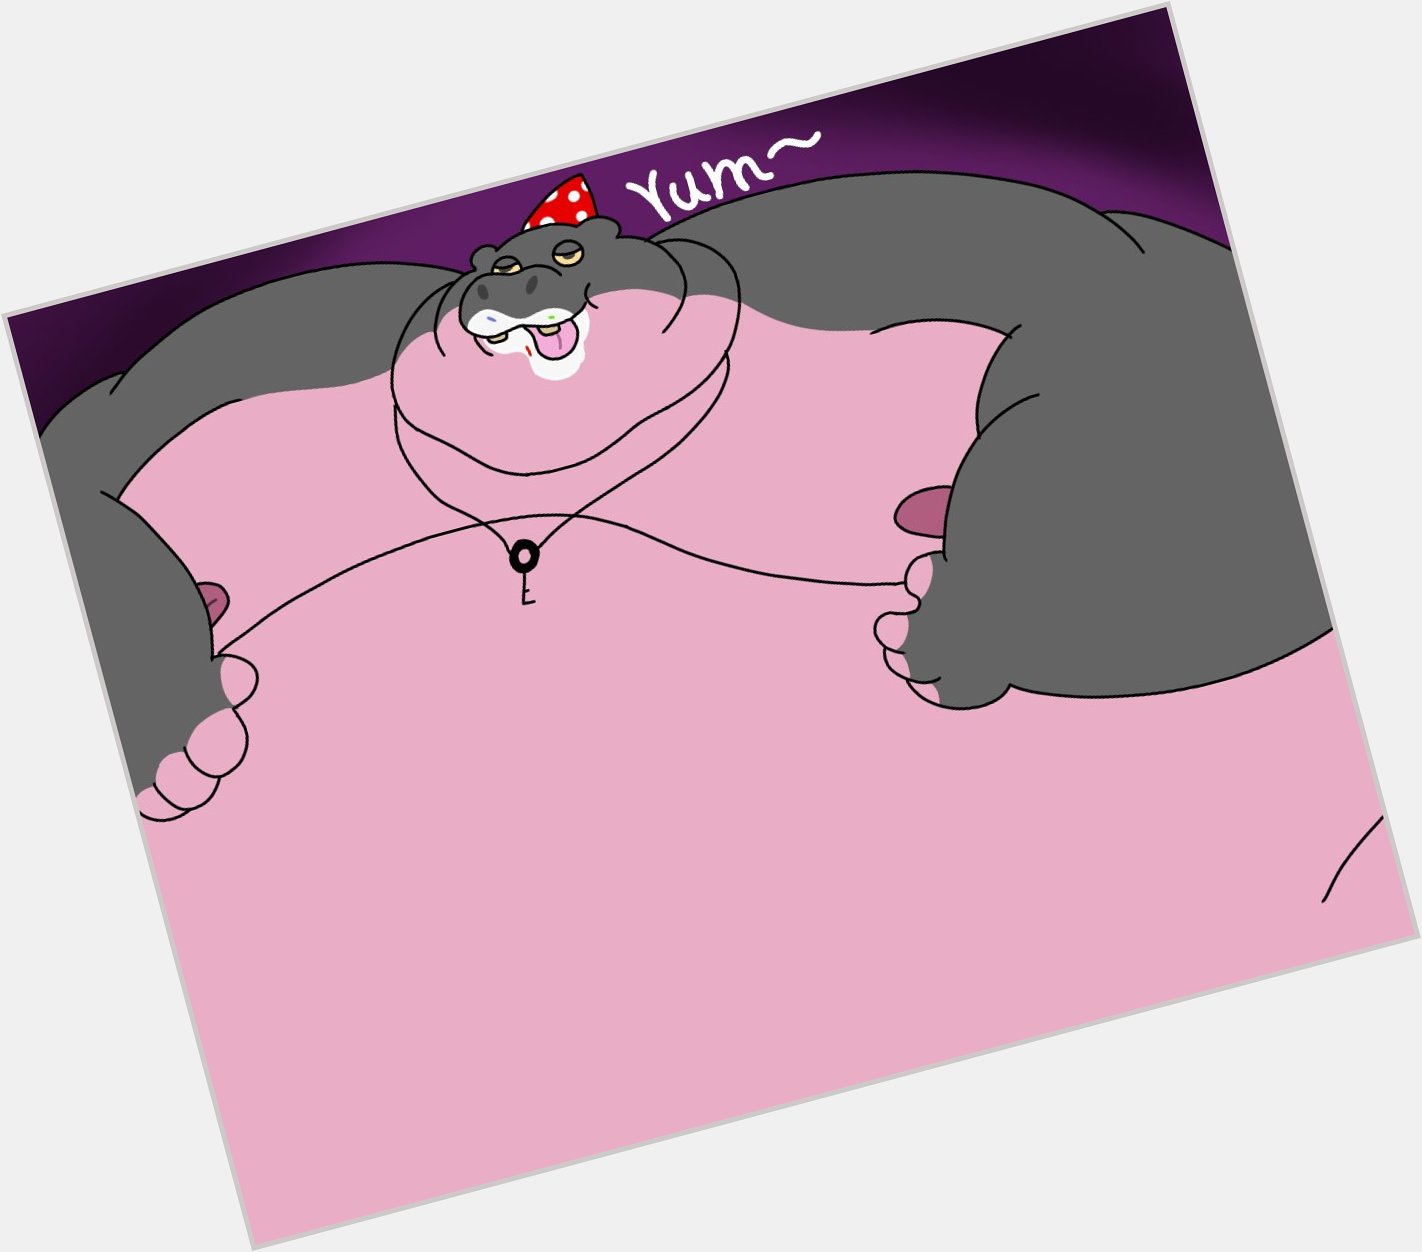 A quickie birthday gift drawing for a hippo like me ! 

Happy birthday big boi! 